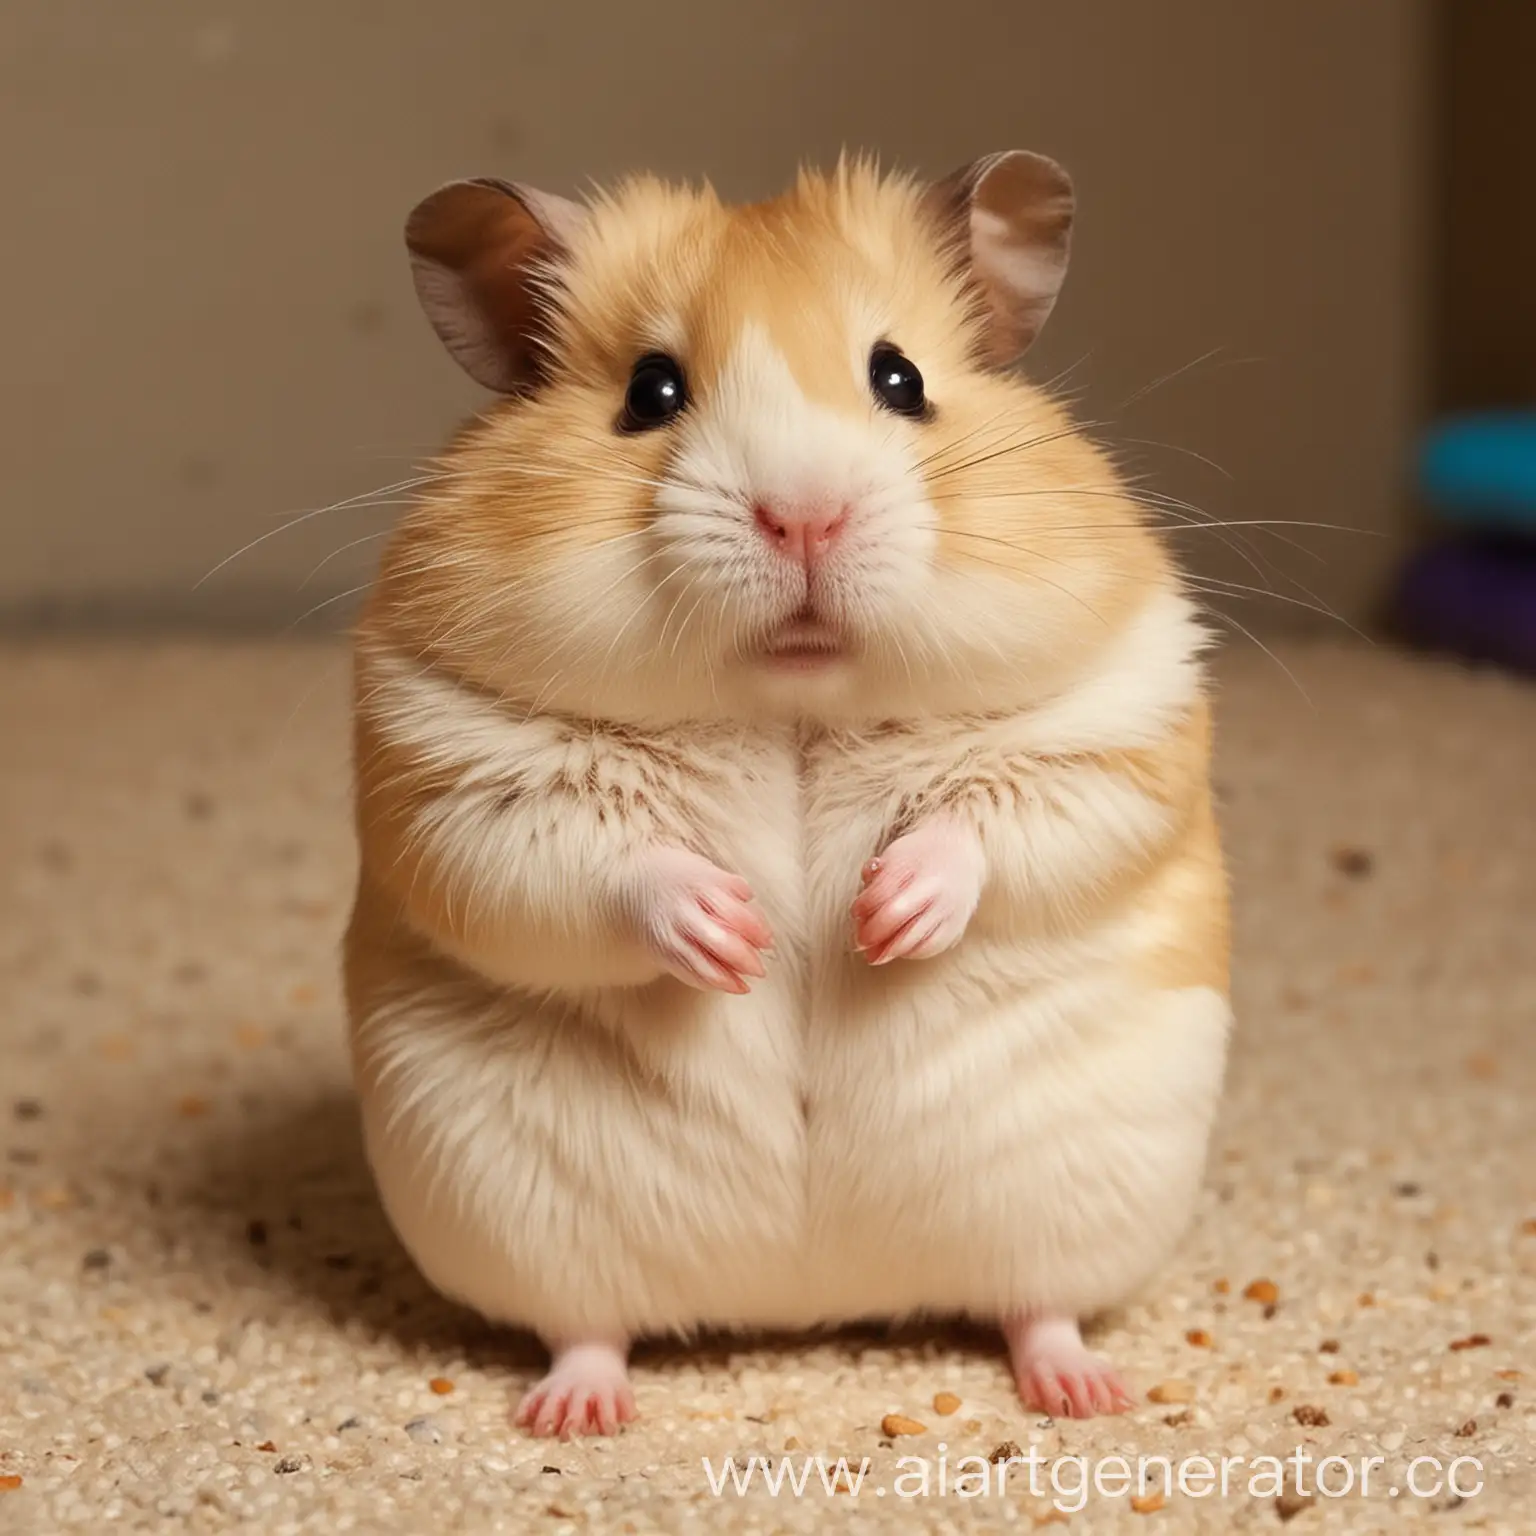 Giant-Hamster-Ruling-Over-the-Universe